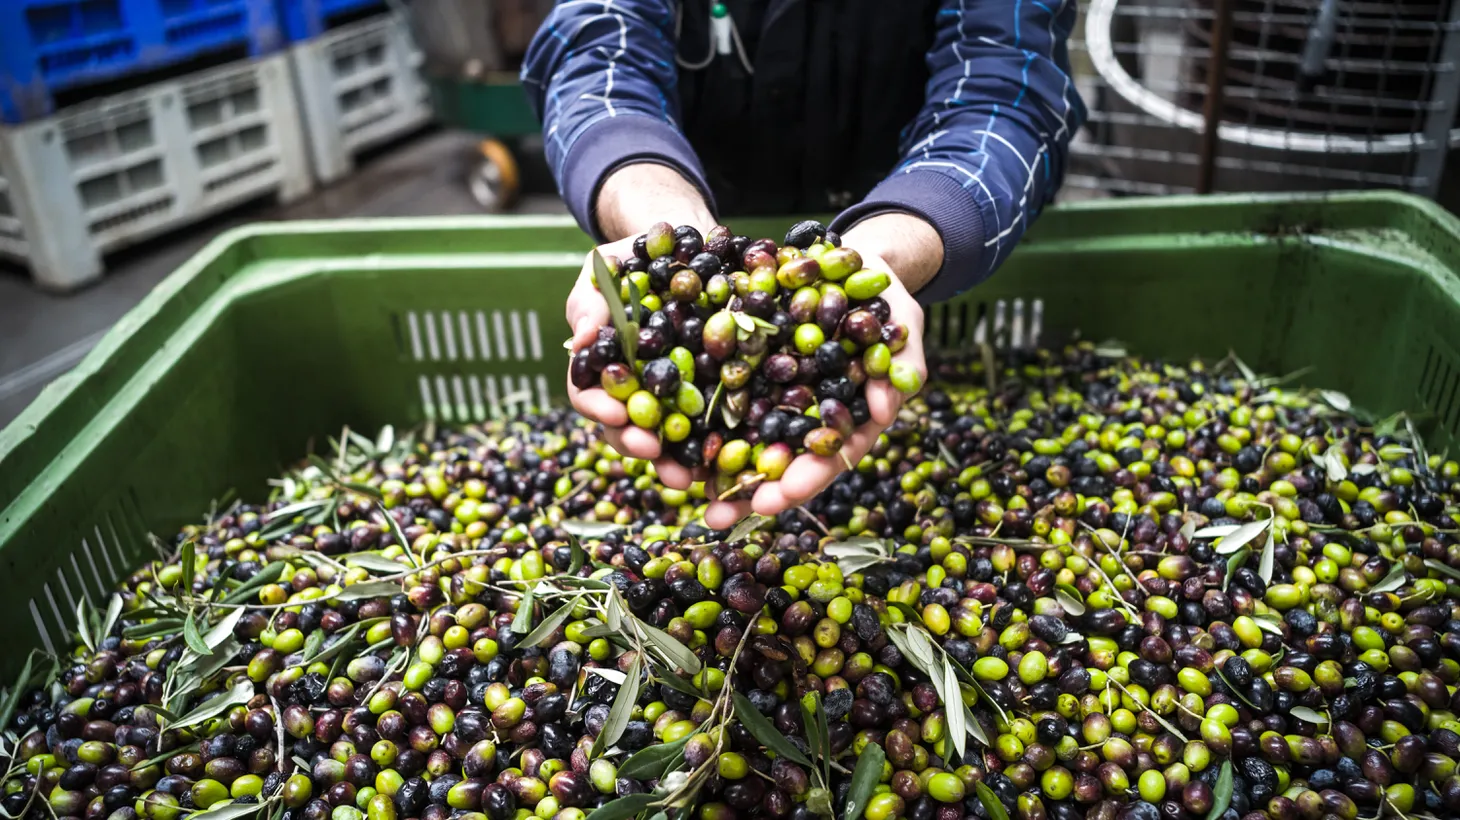 Olives are harvested in the fall to be turned into olive oil at the press. Depending on olive variety, age of tree, and time of year harvested, it takes approximately four to five kilos of olives to make one liter of olive oil.